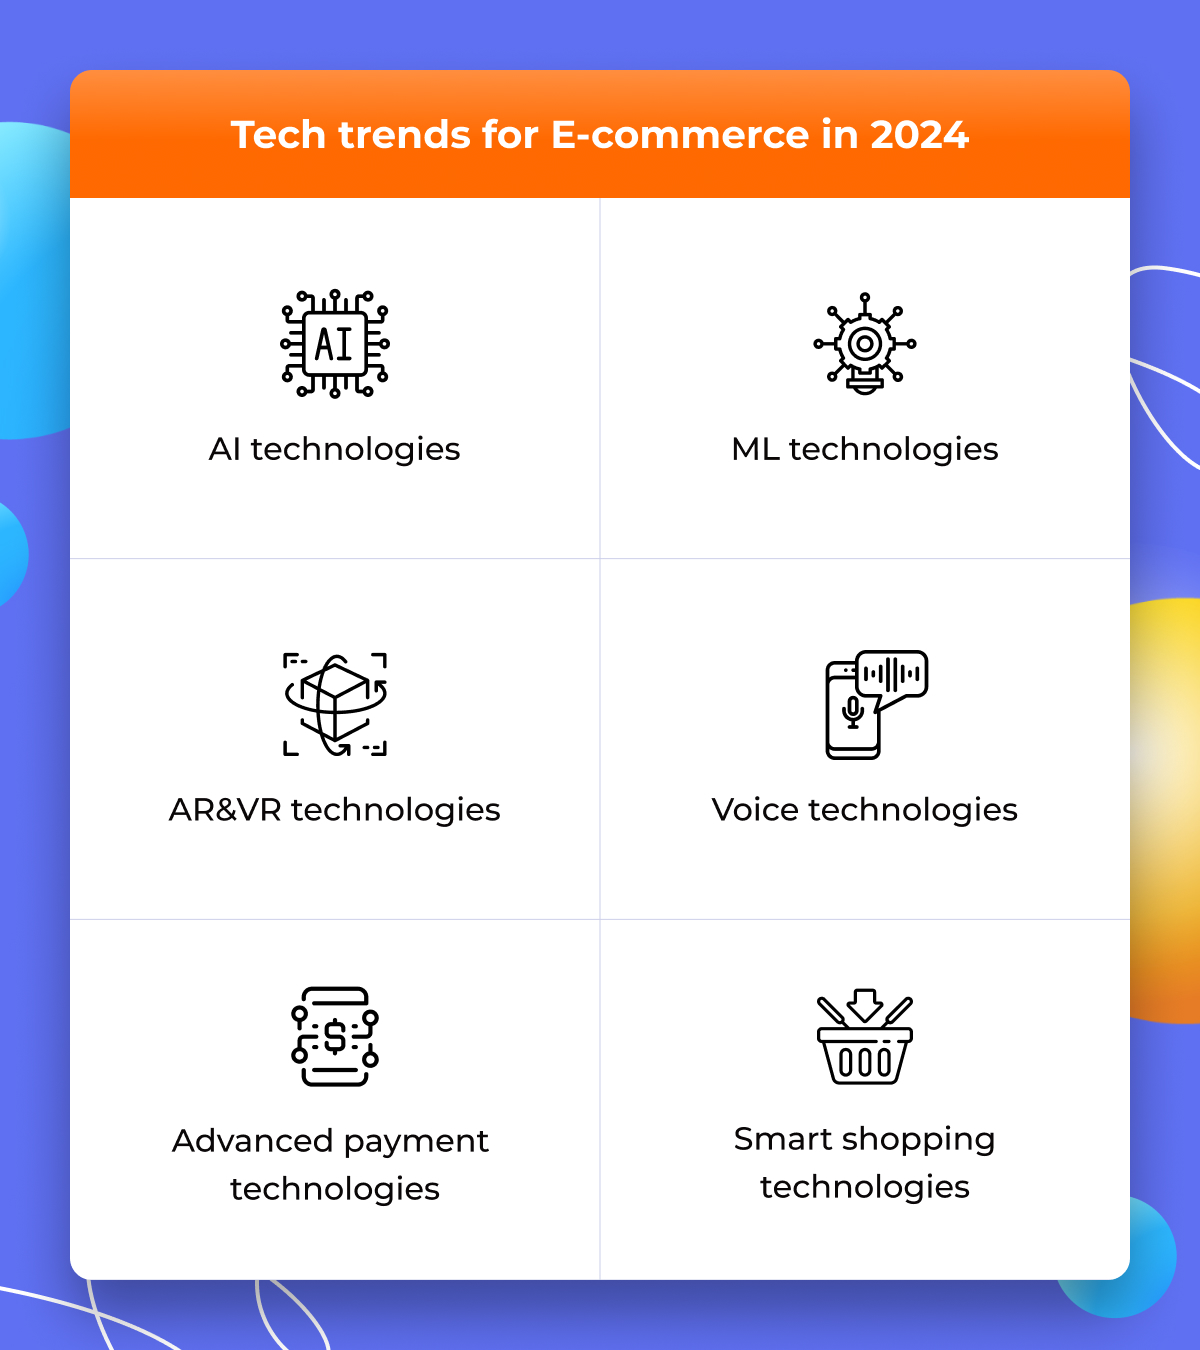 Tech trends for E-commerce in 2024 